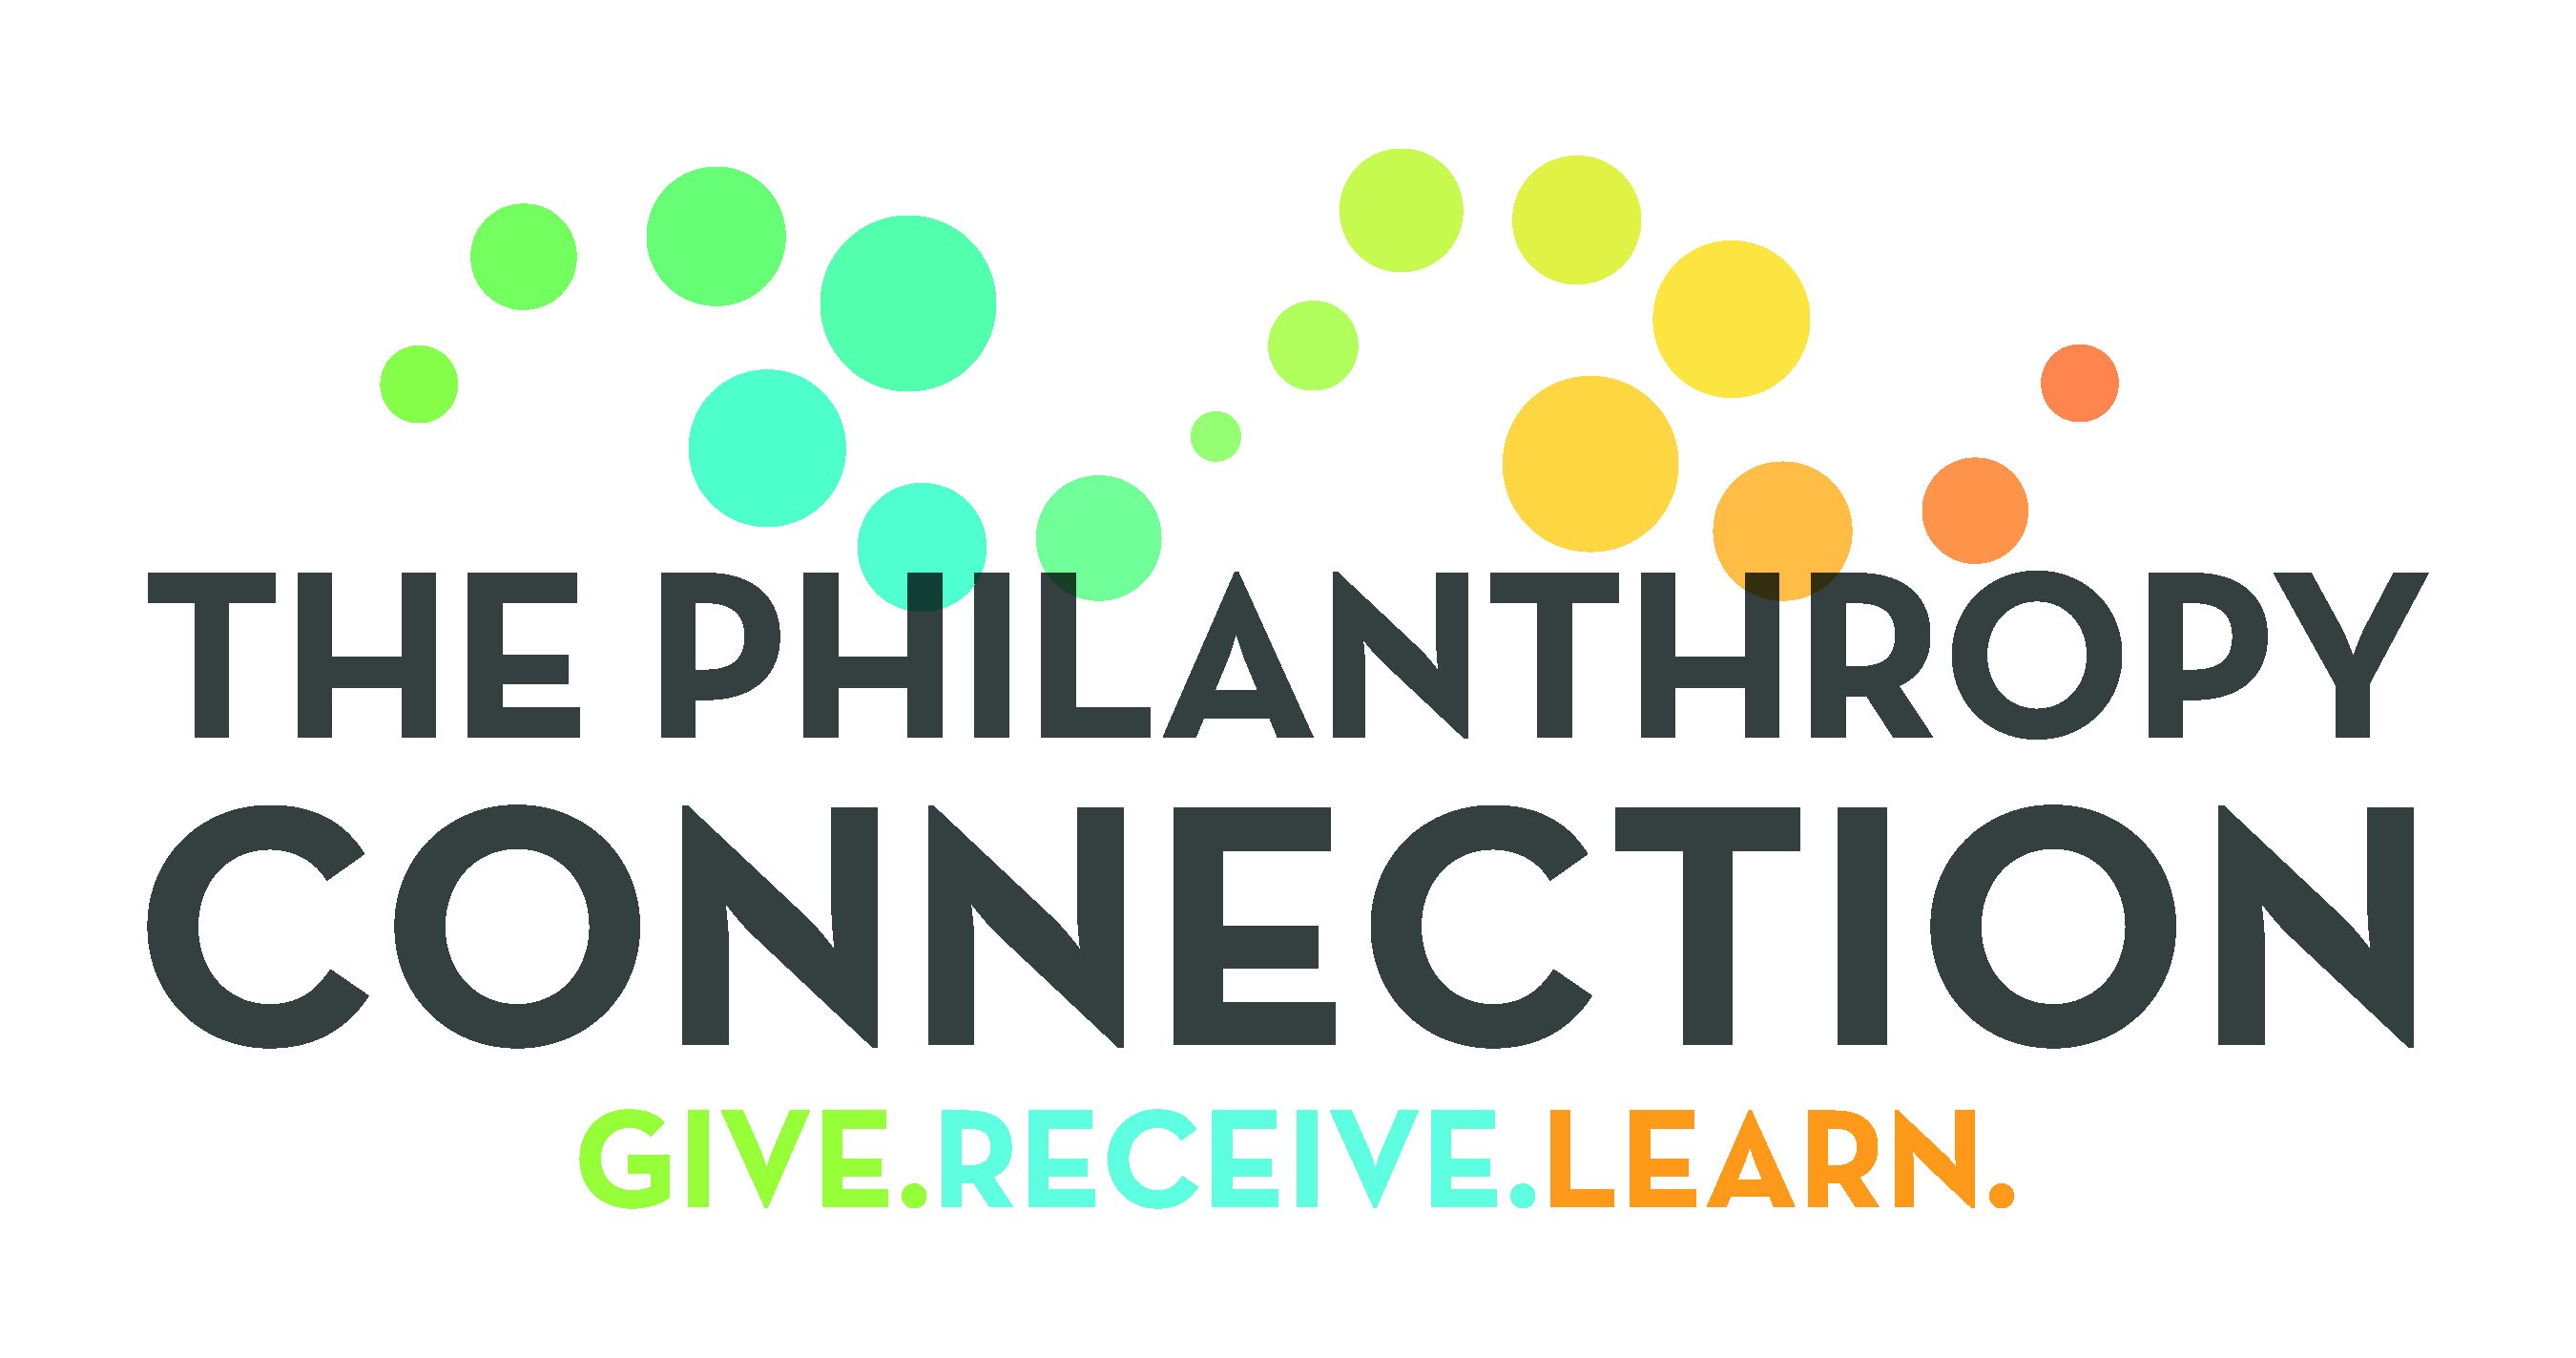 The Philanthropy Connection